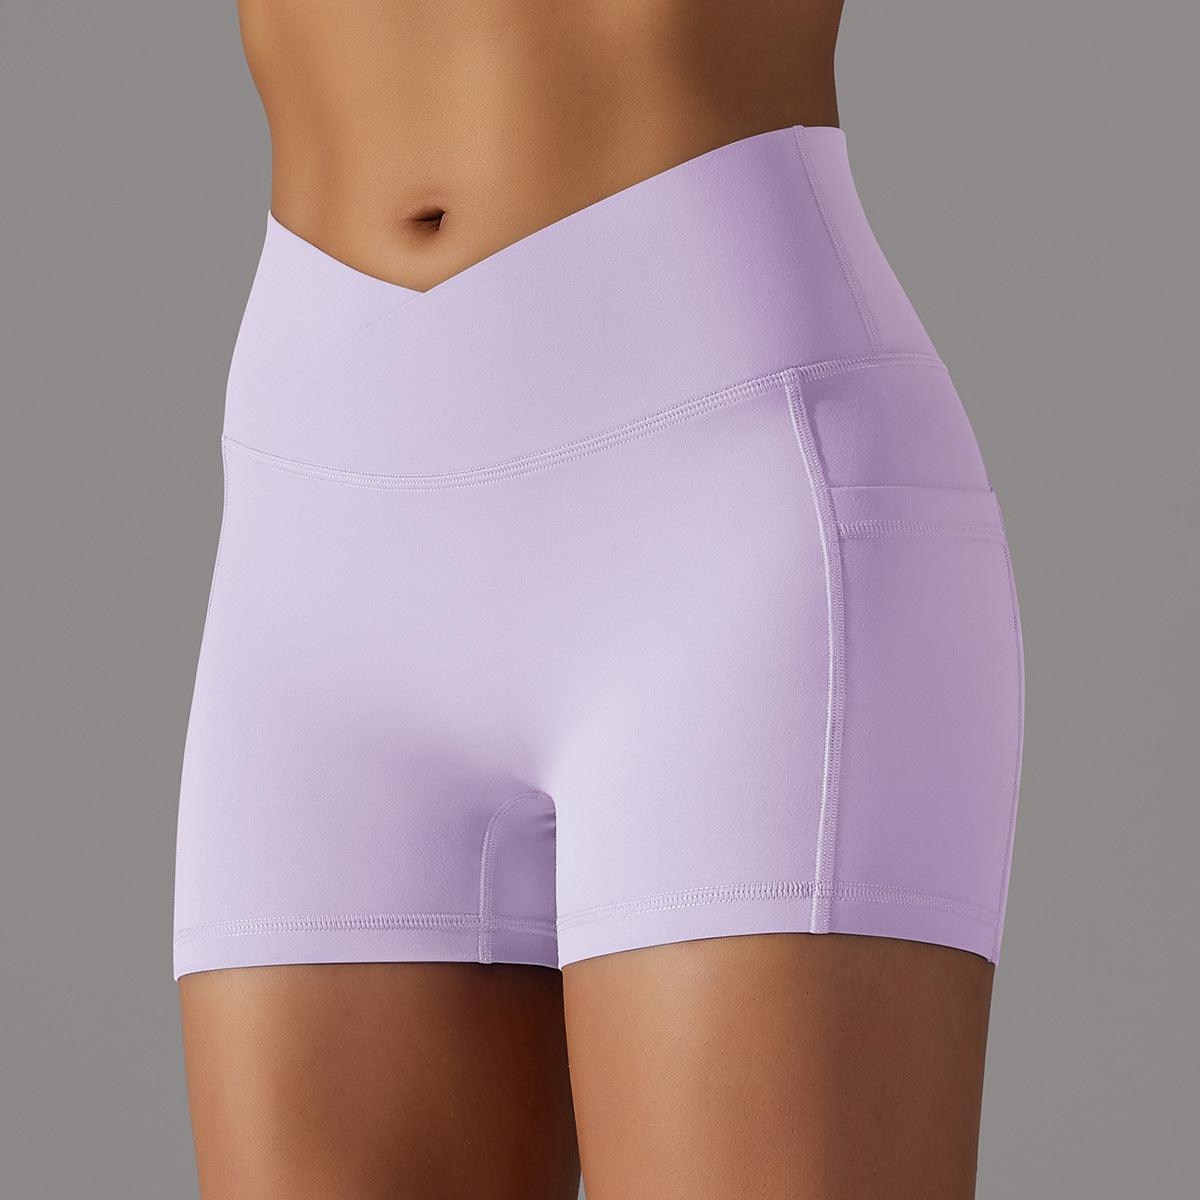 Yoga Shorts With Phone Pocket Design Fitness Sports Pants For Women Clothing - Your-Look